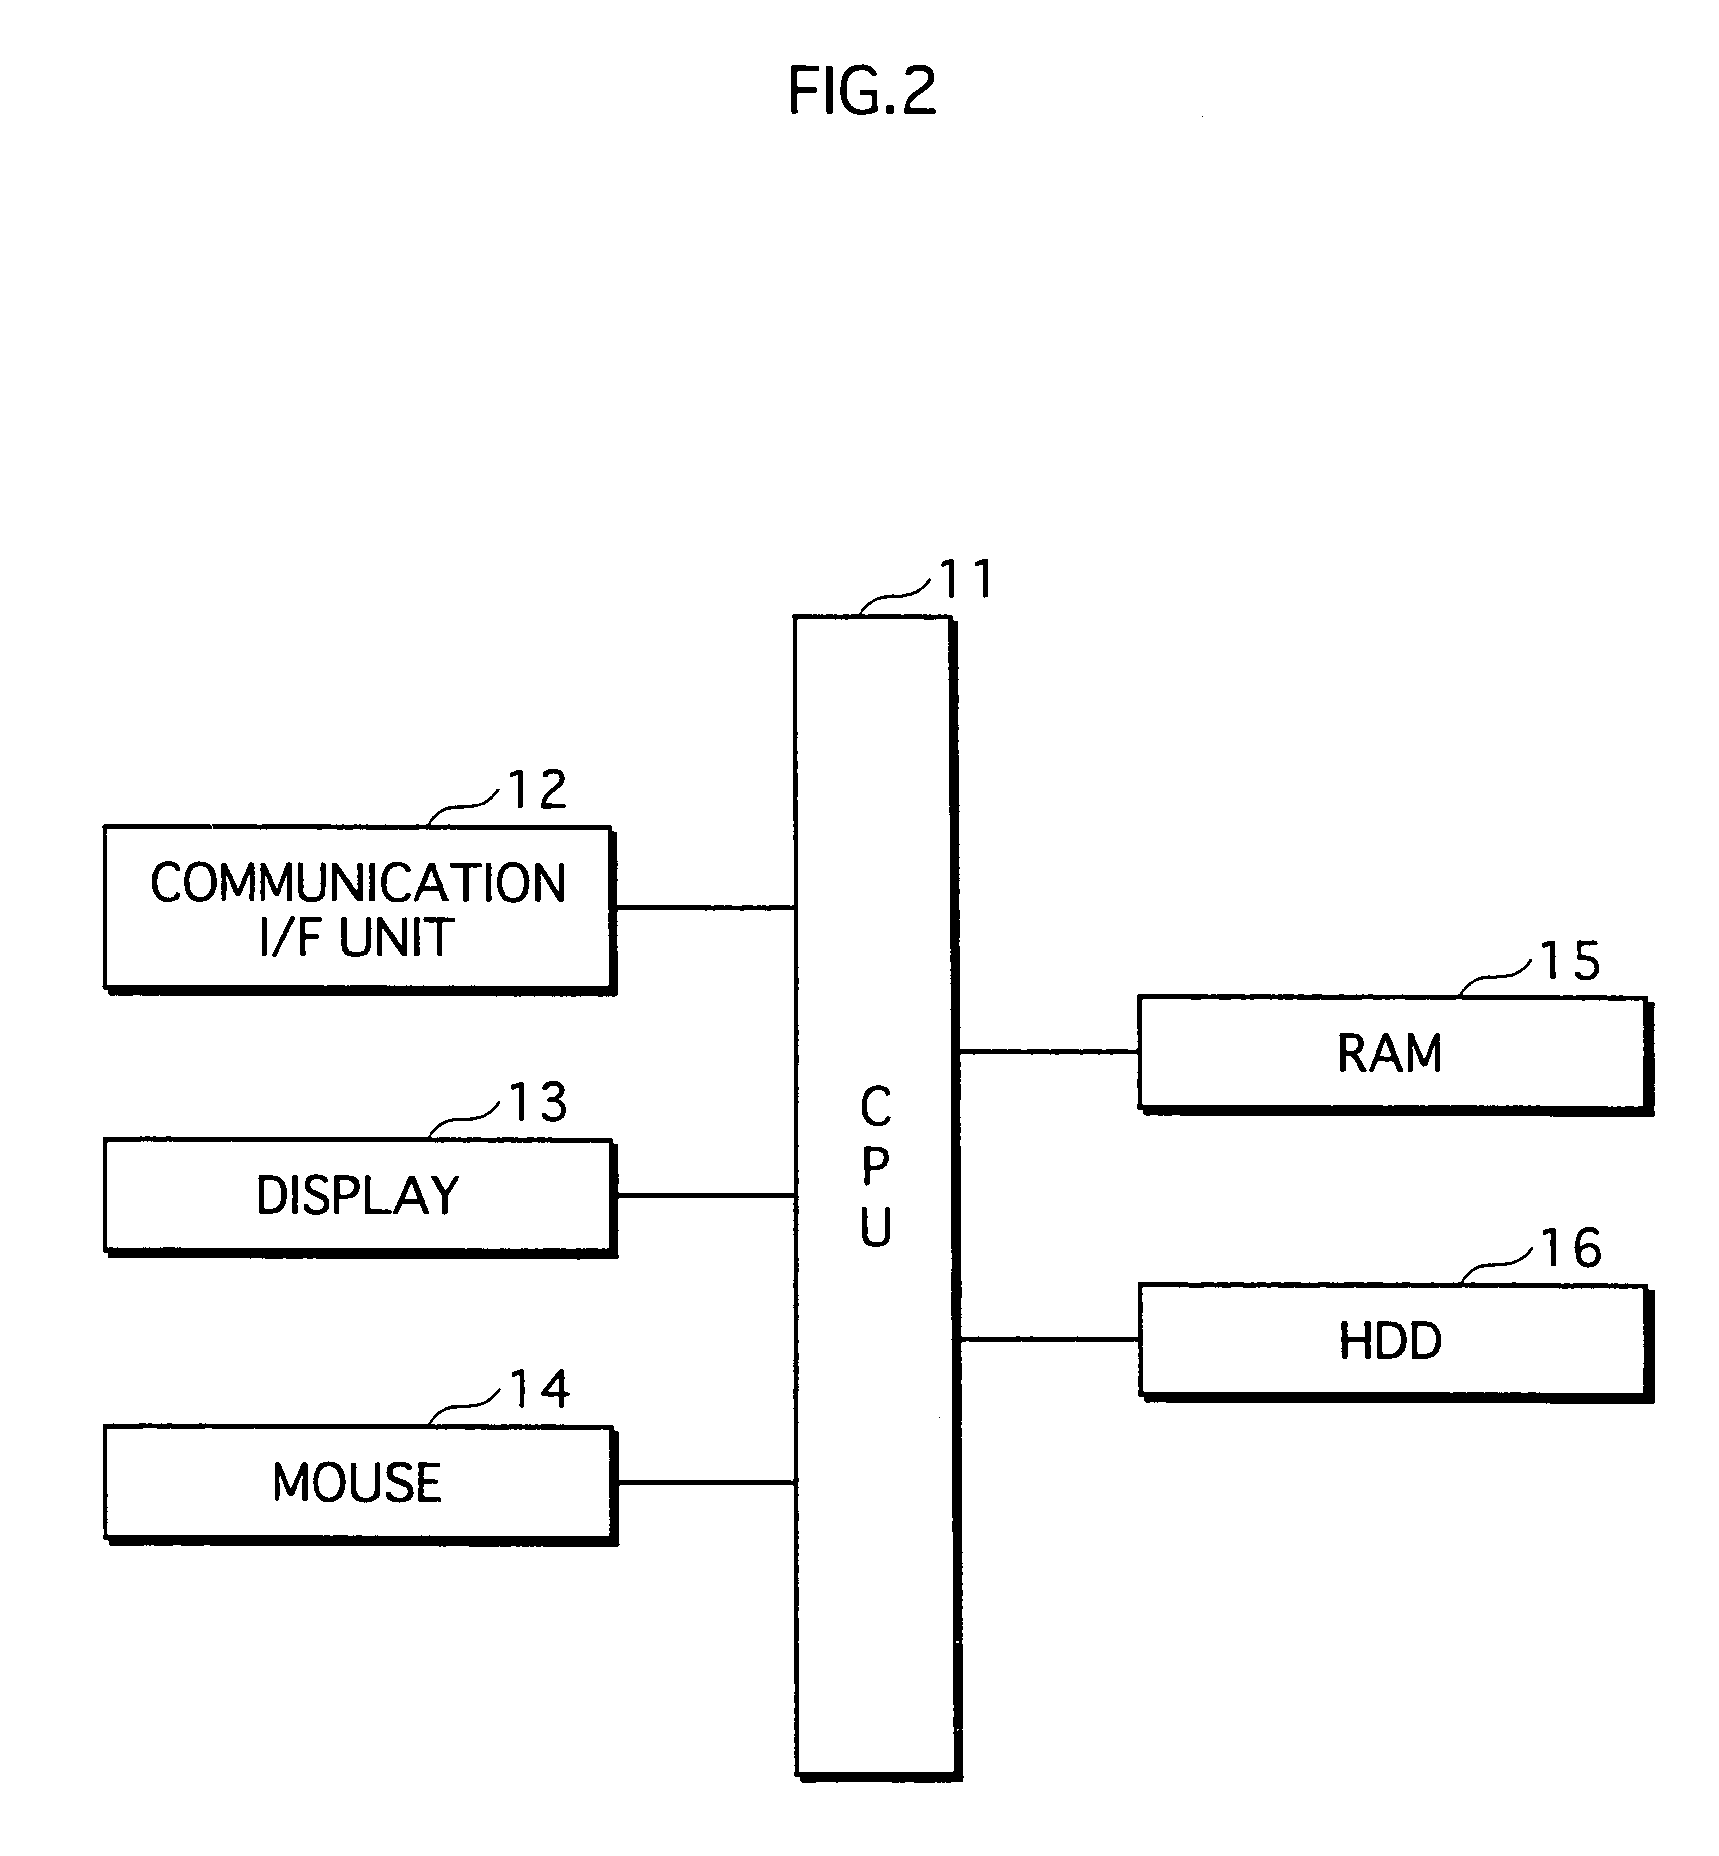 Method for configuring device driver by customizing same user setting using in different image processing devices